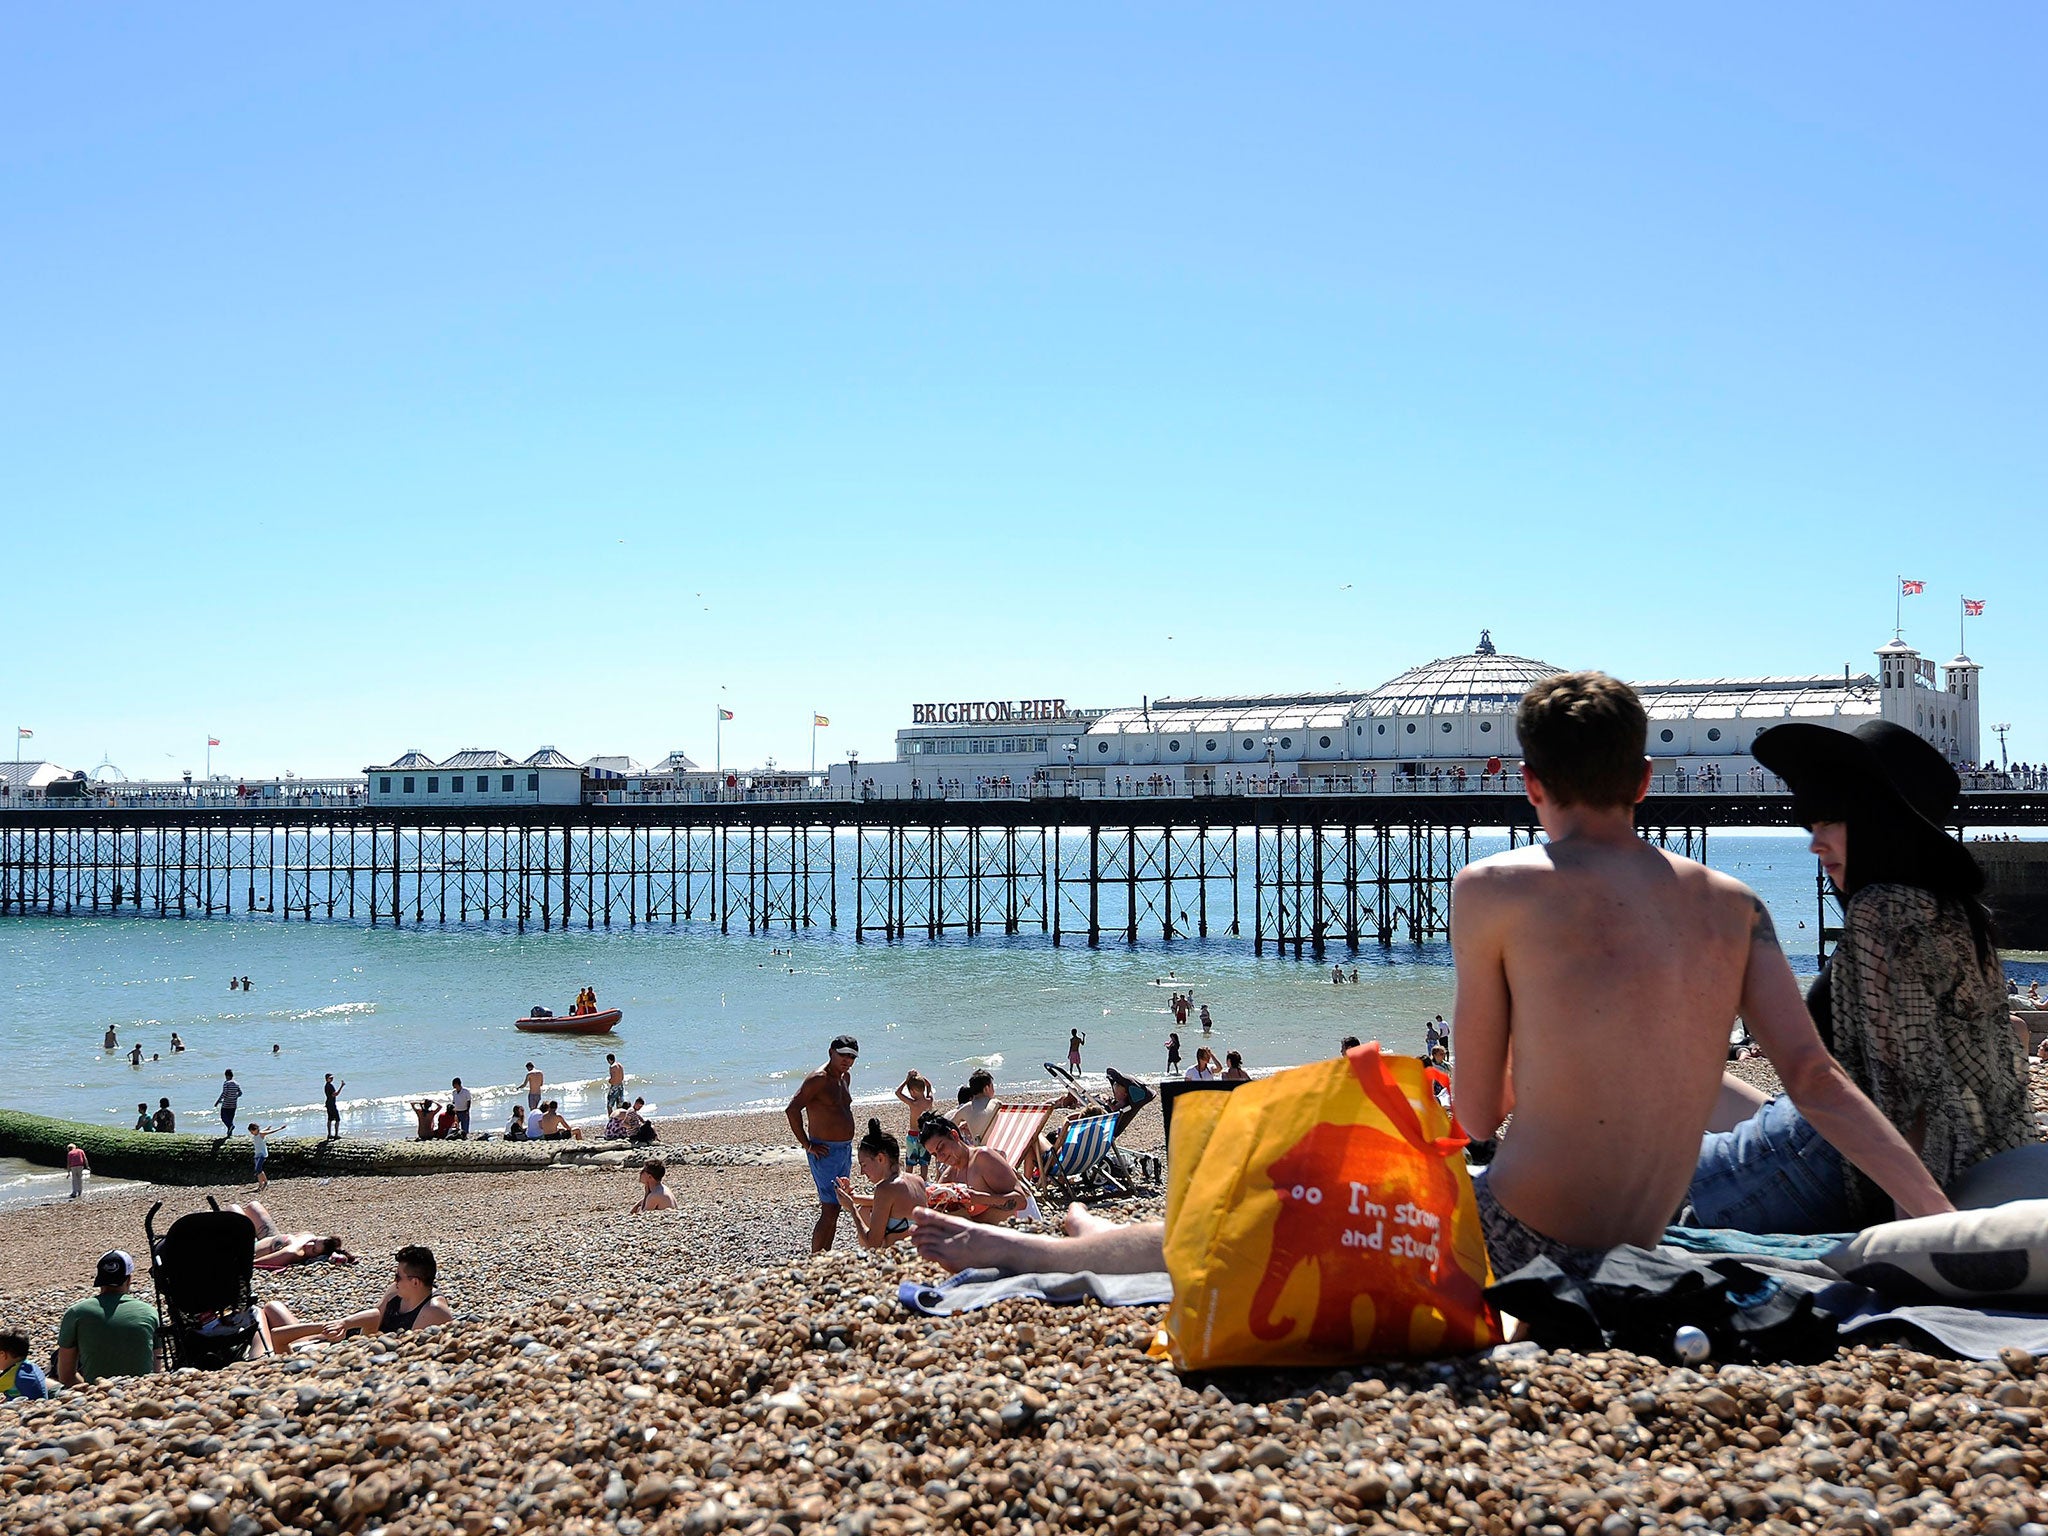 Sunbathers enjoy the hot weather on the beach in Brighton